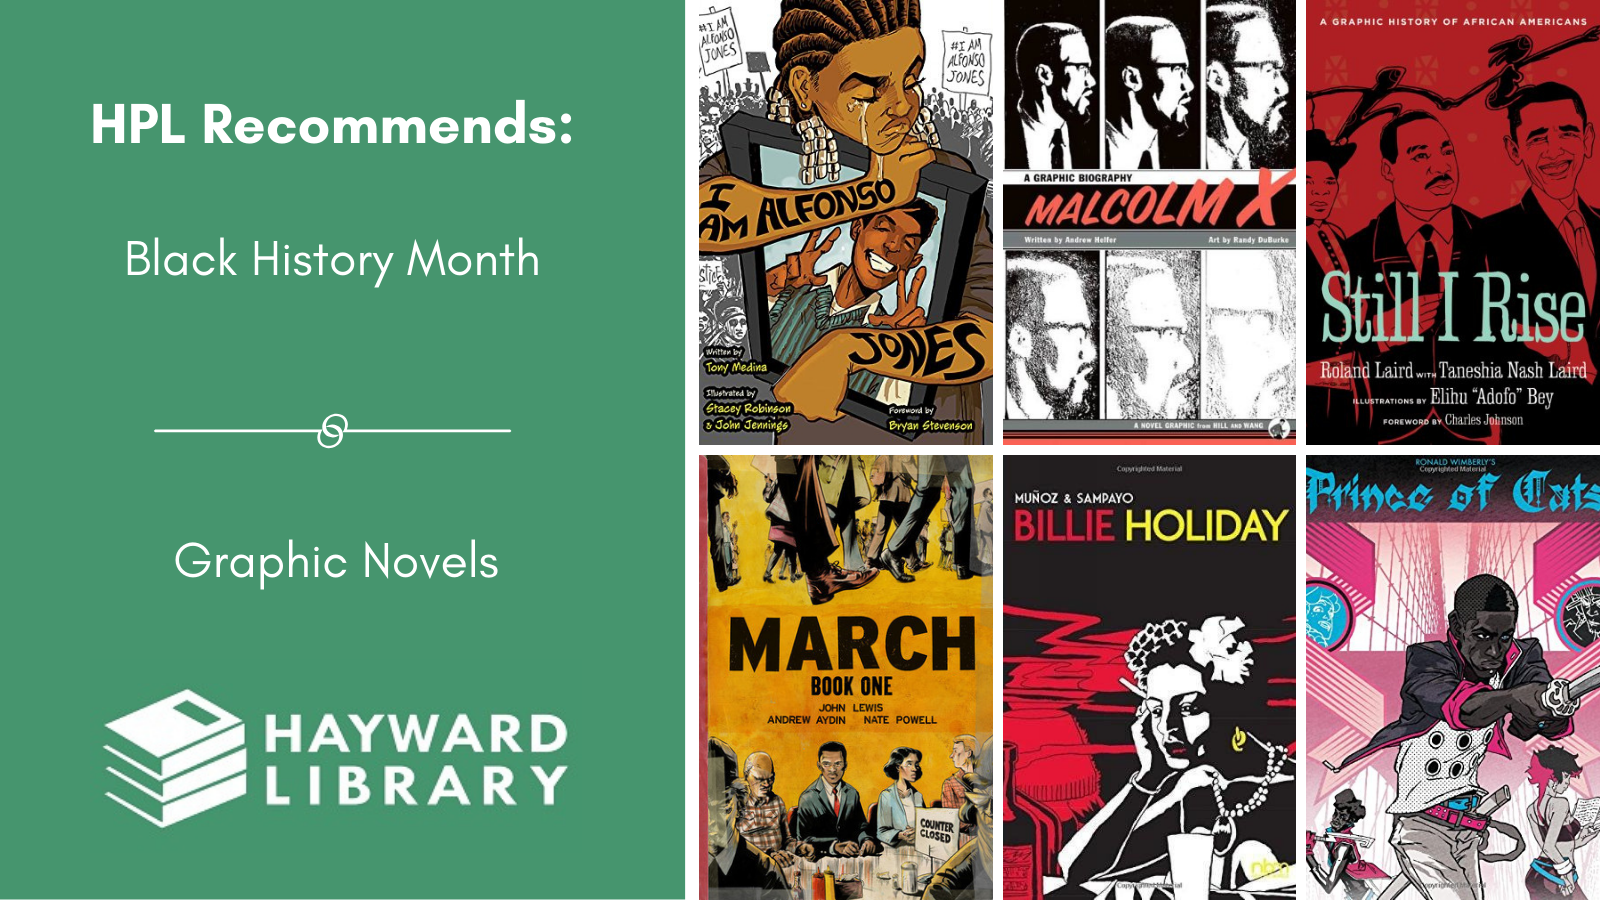 Collage of book covers with a green block on left side that says HPL Recommends, Black History Month, Graphic Novels in white text, with Hayward Library logo below it.